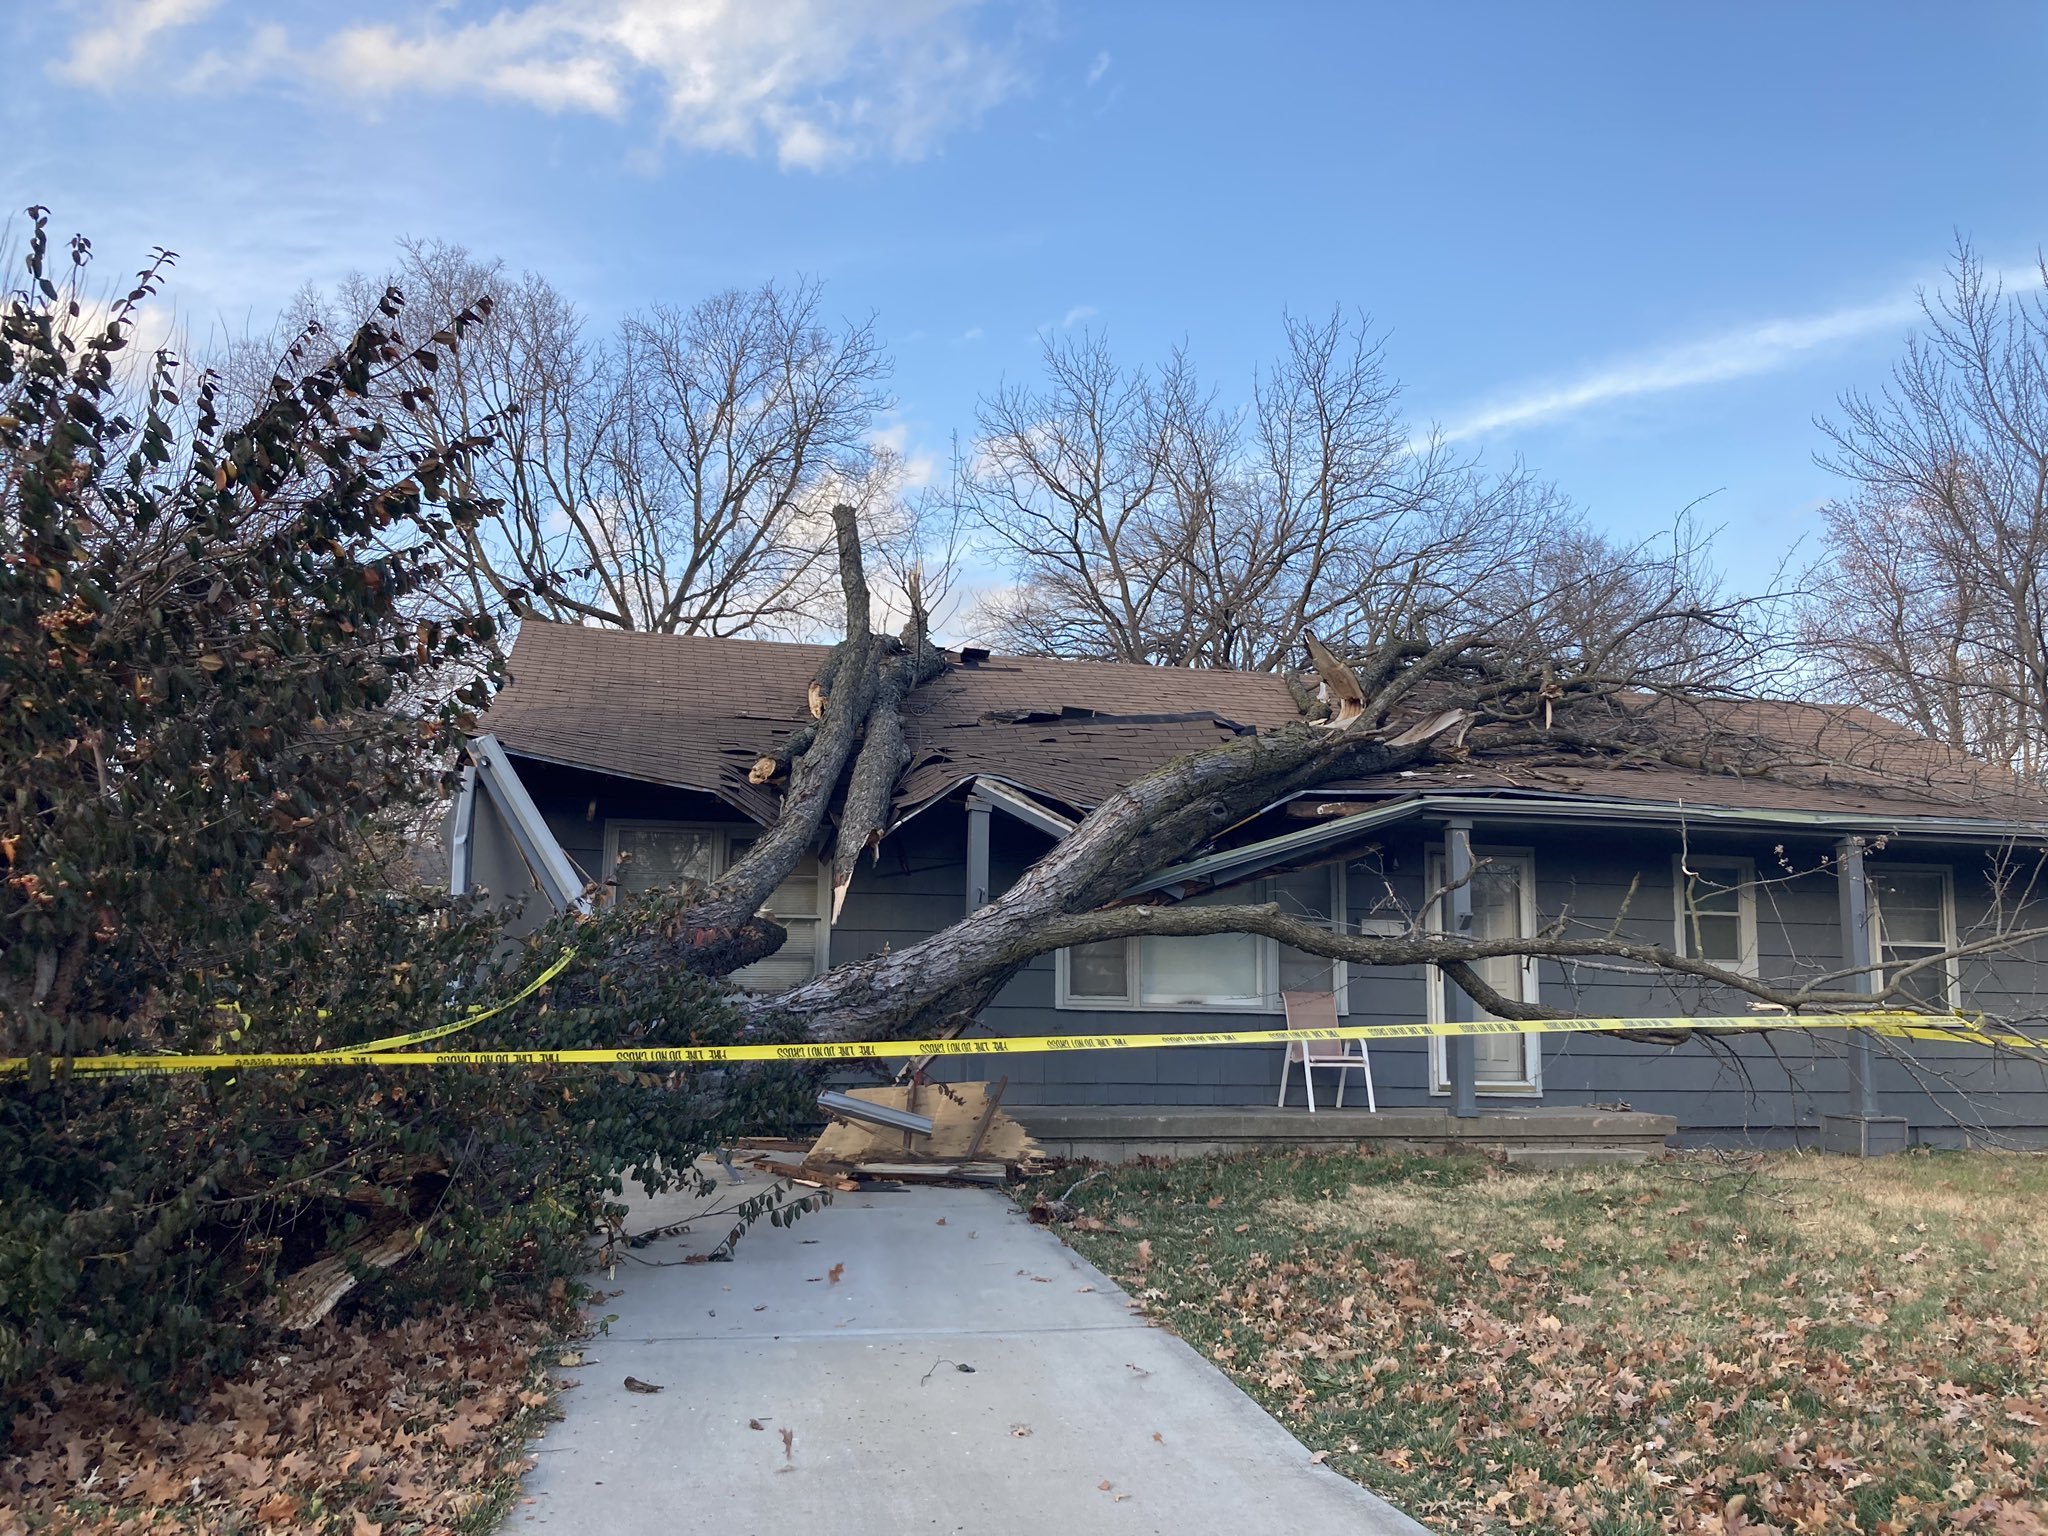 Photo of tree fallen on house in Overland Park. Damage occurred ahead of evening thunderstorms.